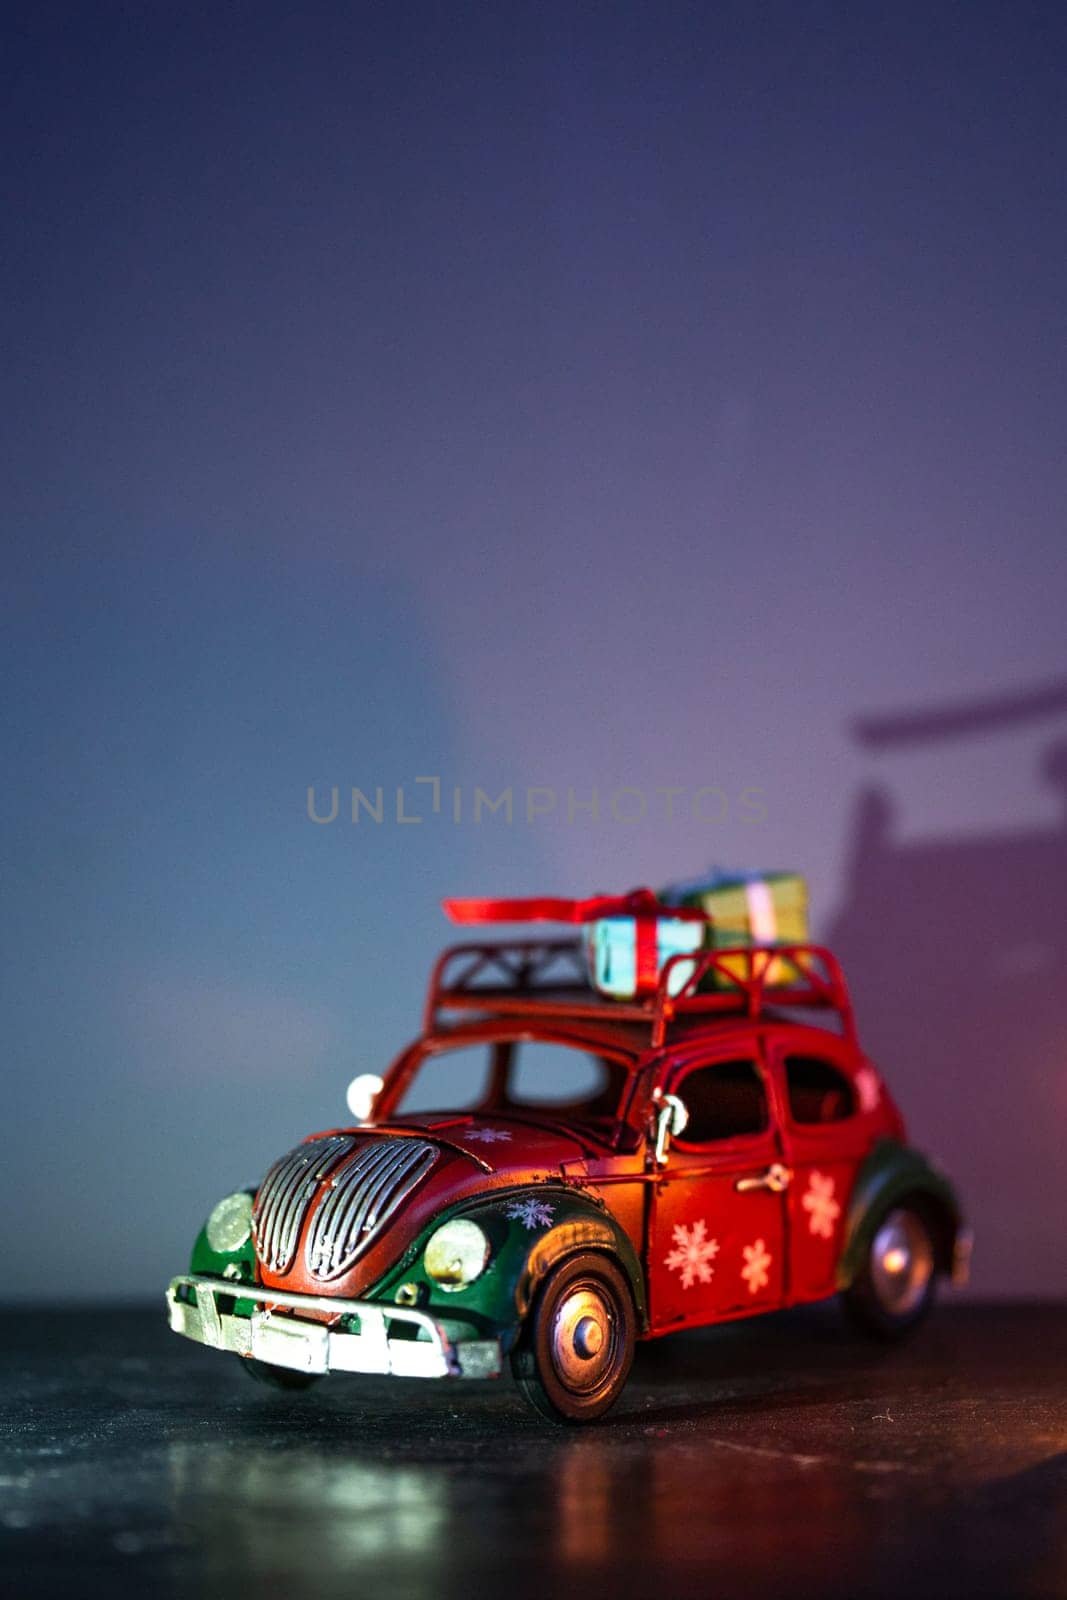 toy iron car model with gifts on the roof. interior detail.